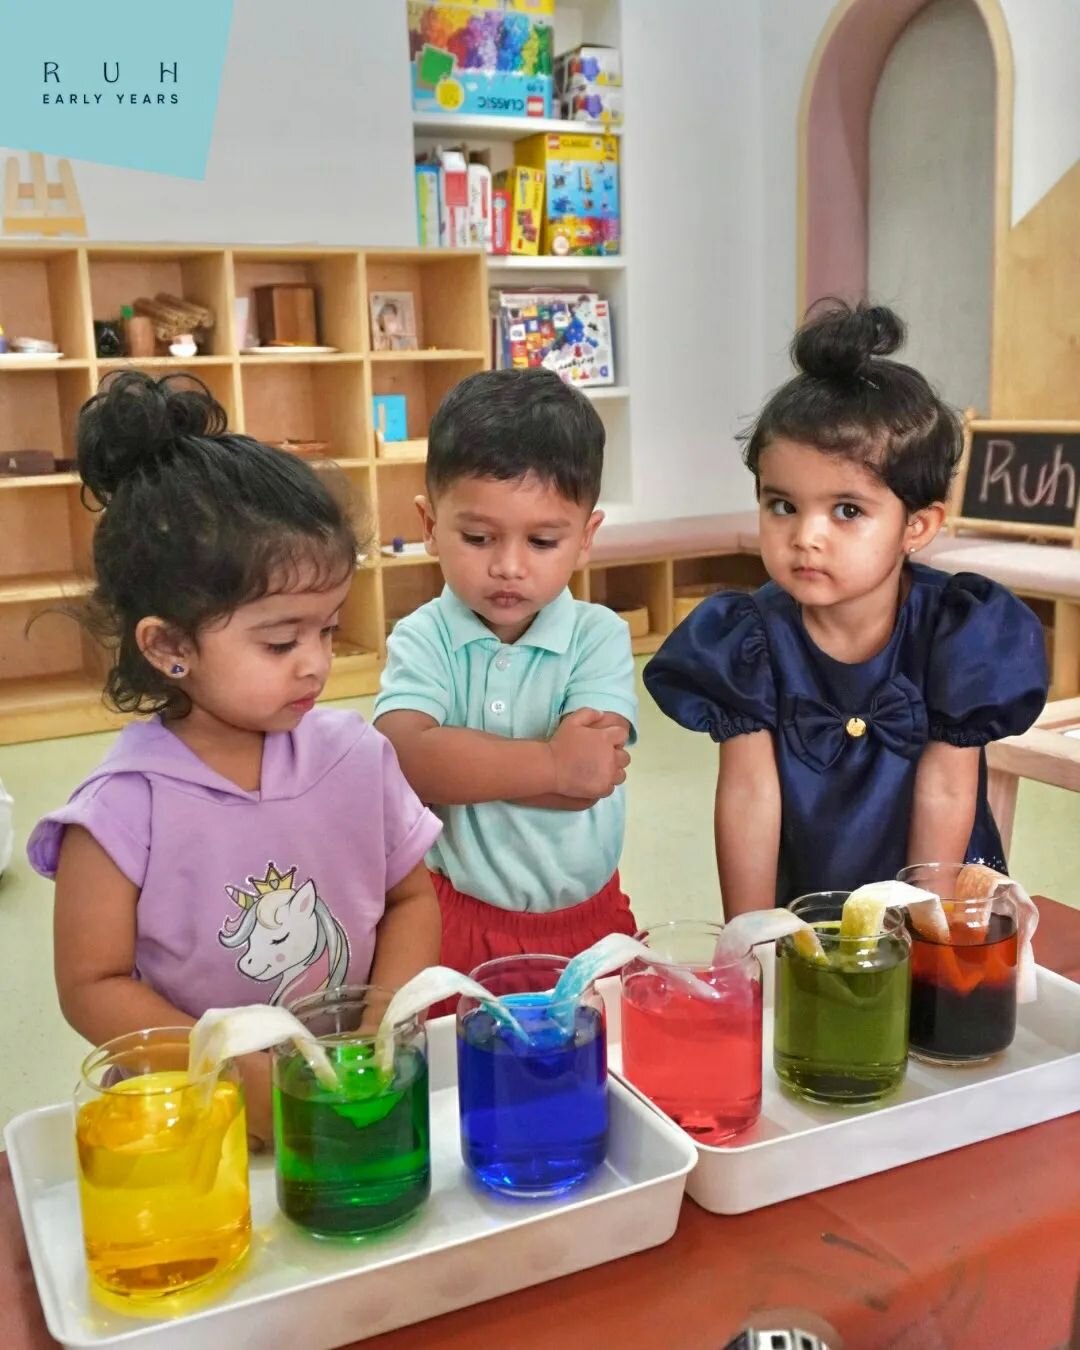 Some more snippets of our Ruhlers from their super fun science activities that got their creative juices flowing! ✨

#ruhearlyyears #coimbatore #education #preschool #preschoolers #kindergarten #earlyyears #earlylearning #childgrowth #childdevelopmen